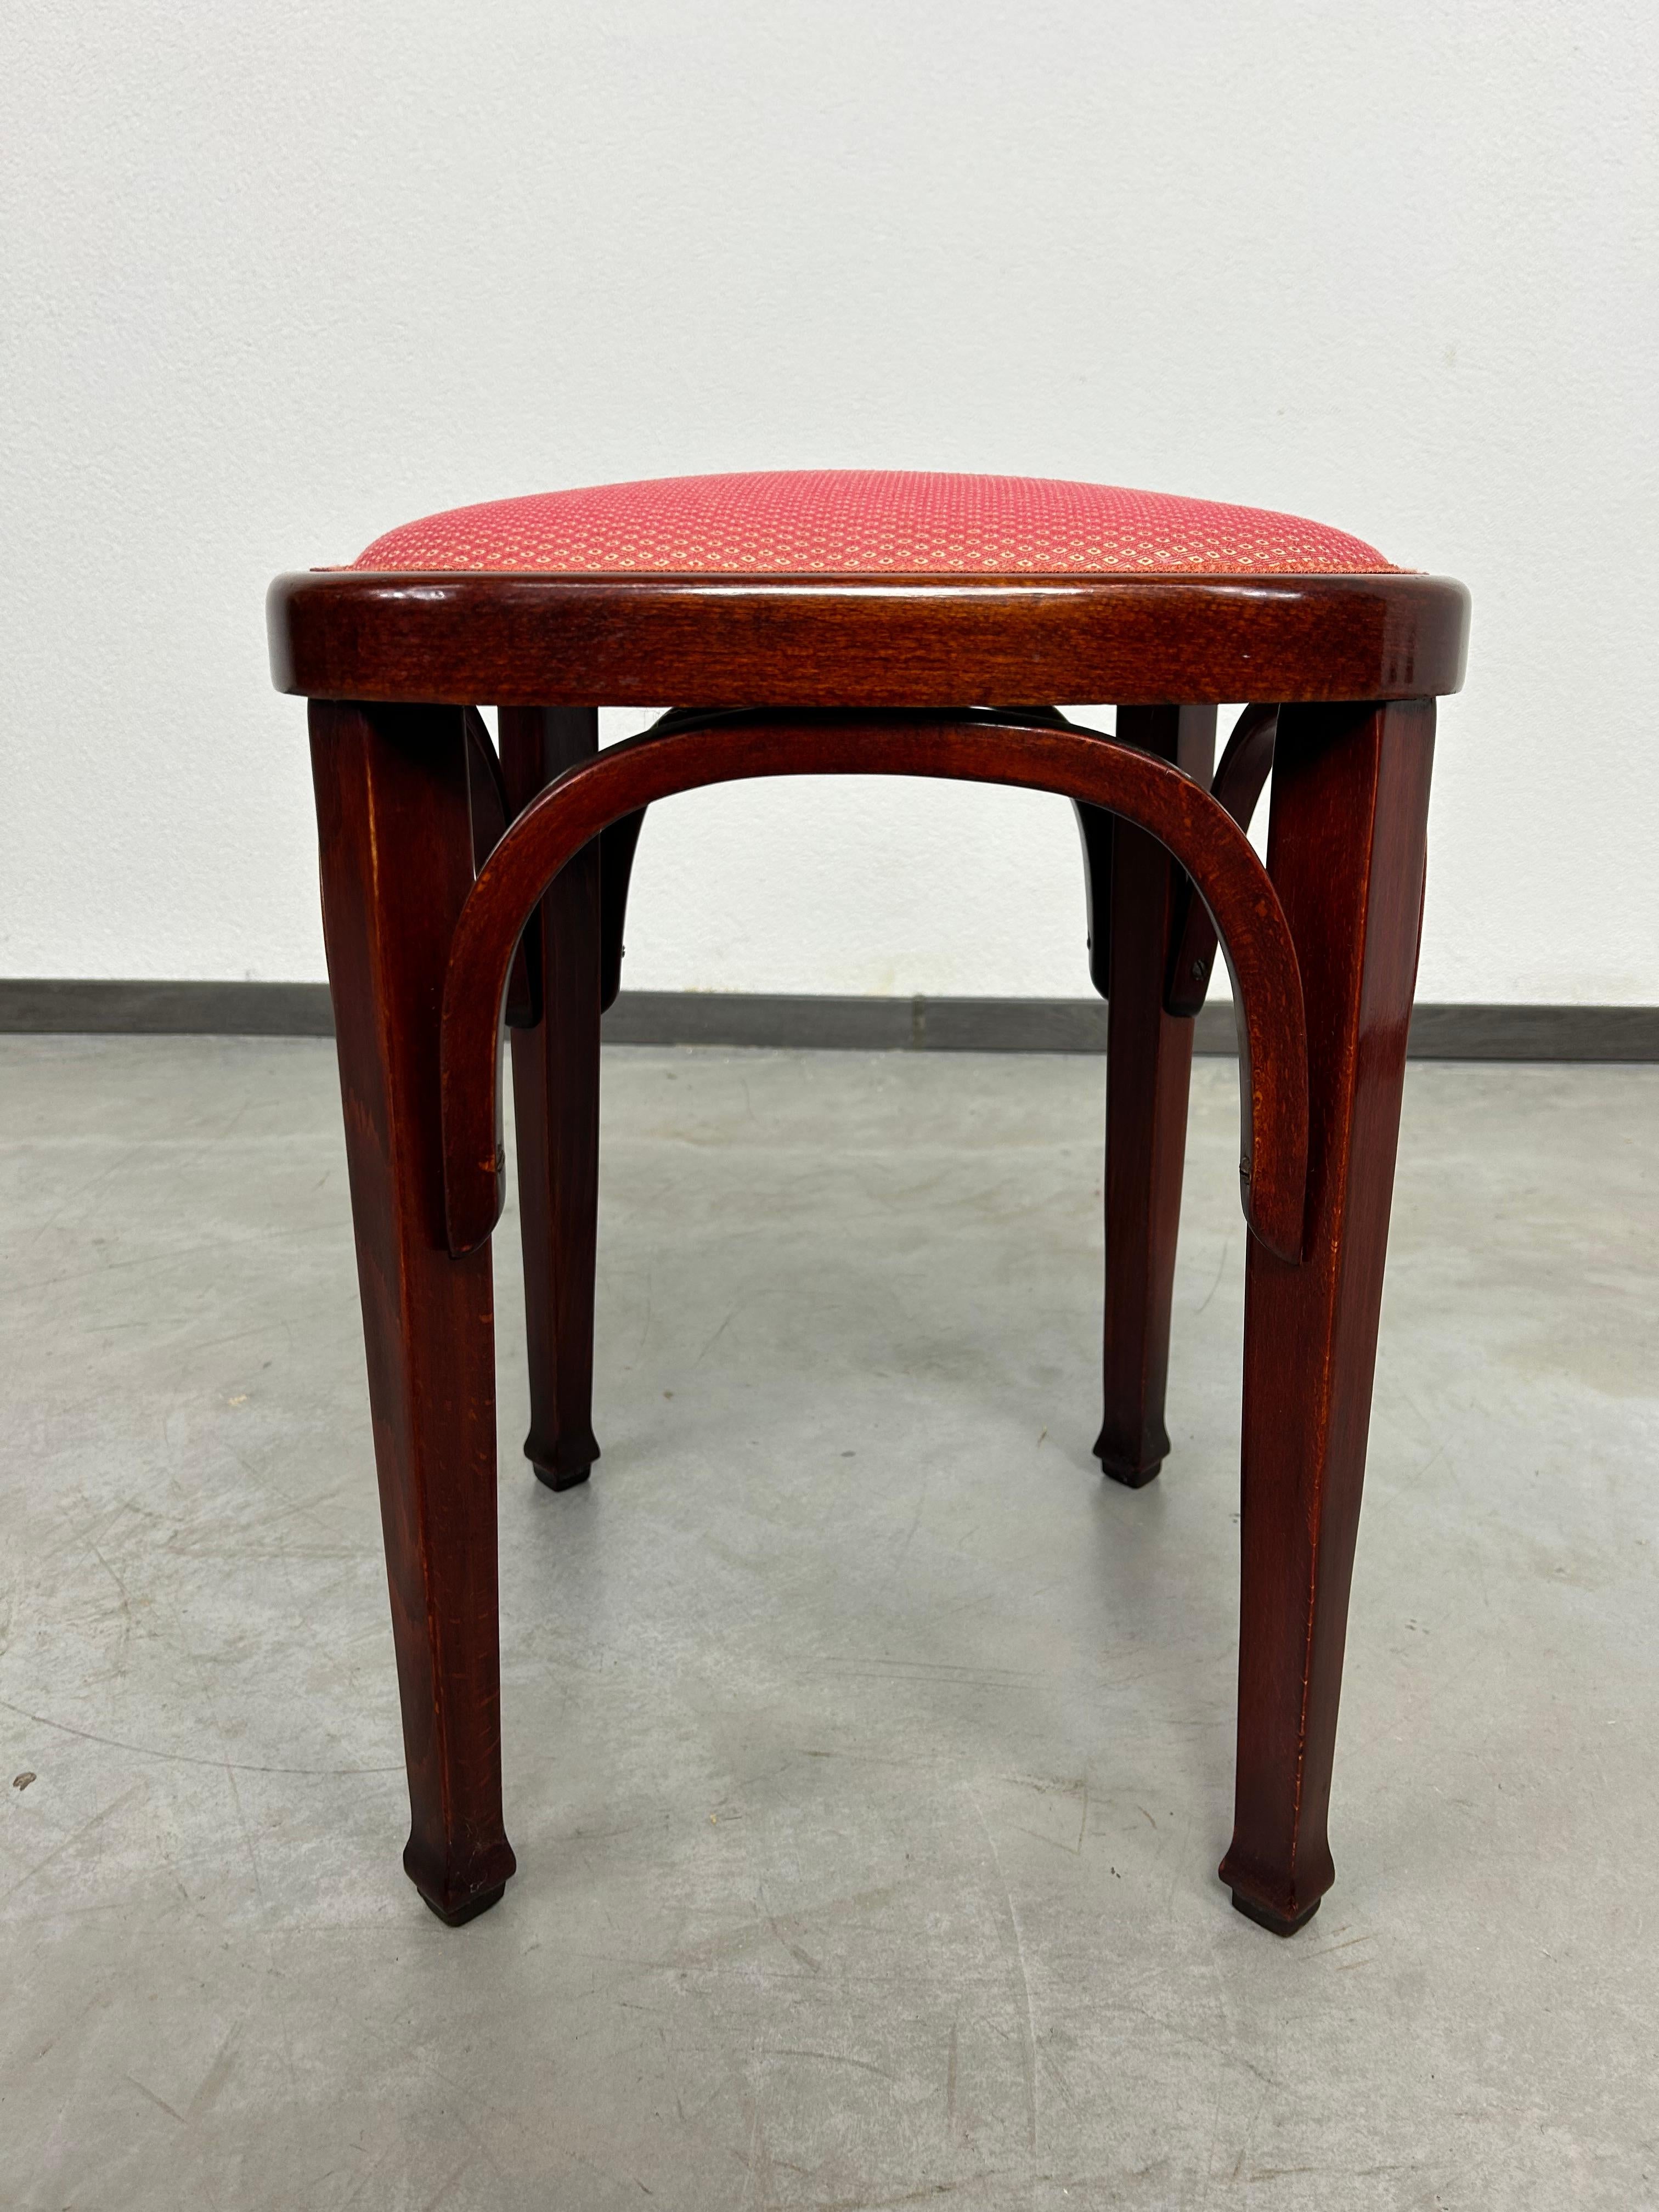 Jugendstil stool no.715 by Otto Wagner designed for Paris World Exhibition in 1900 for J.J.Kohn. Professionally stained and repolished.